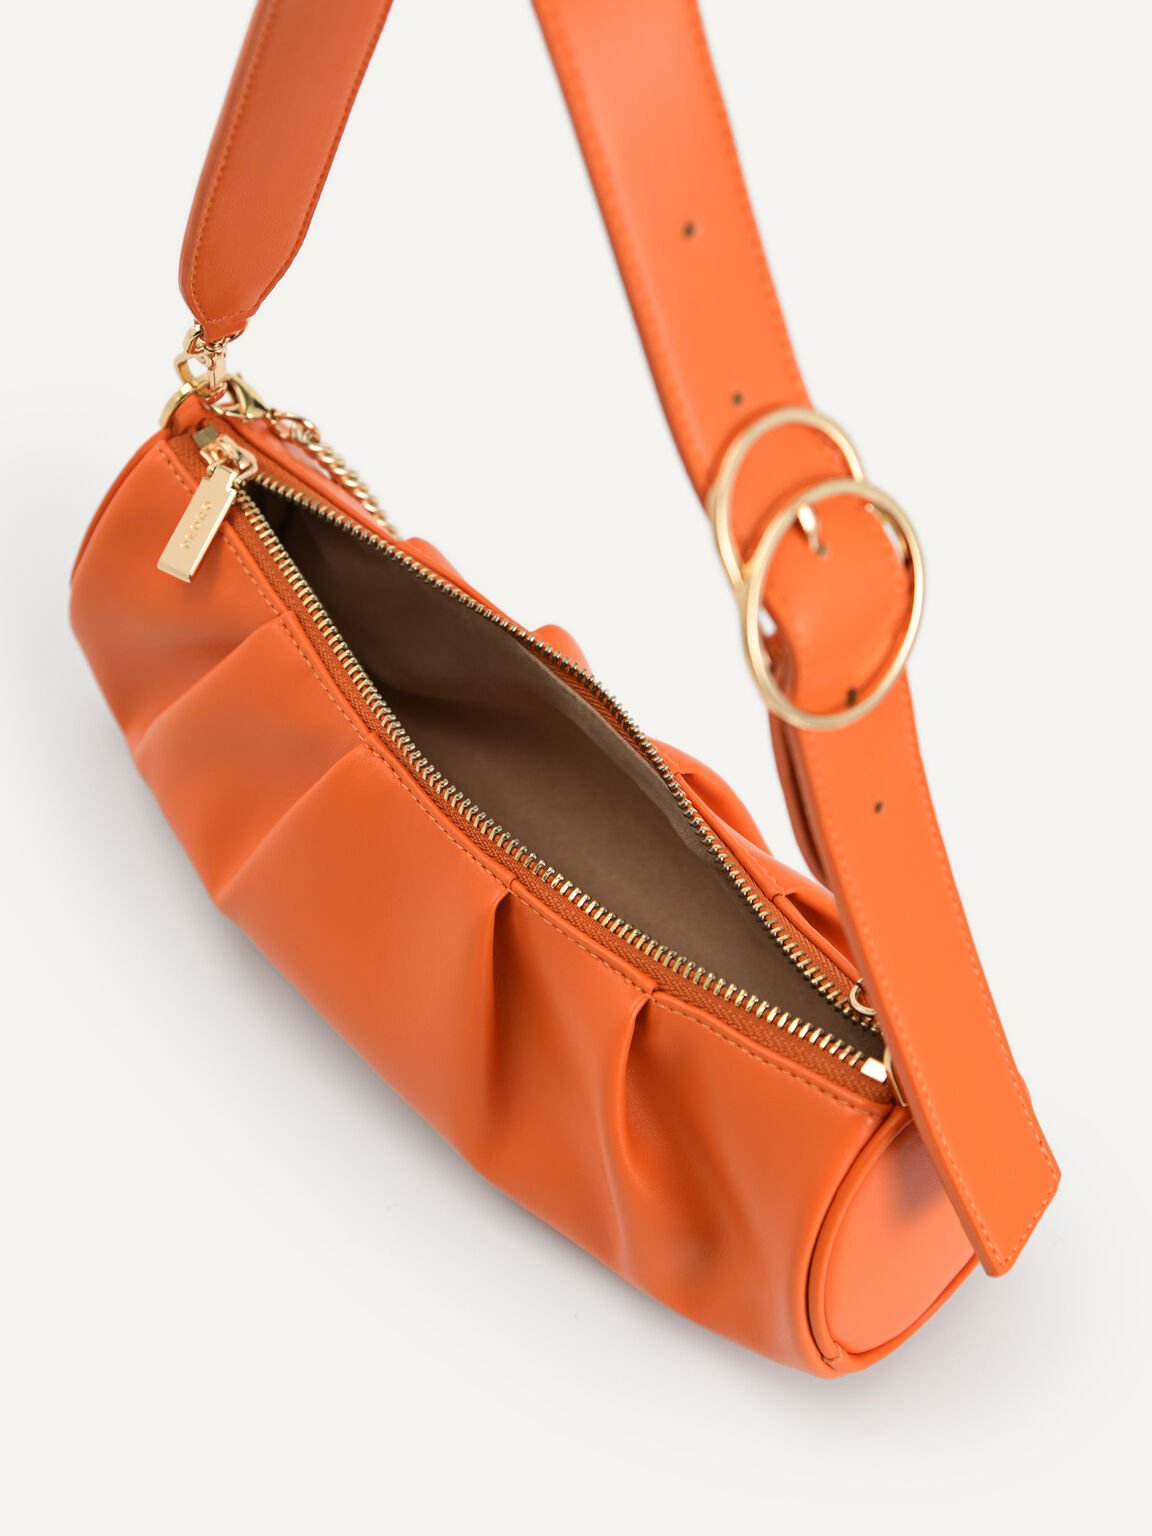 Chain Detailed Ruched Bowling Bag, Orange